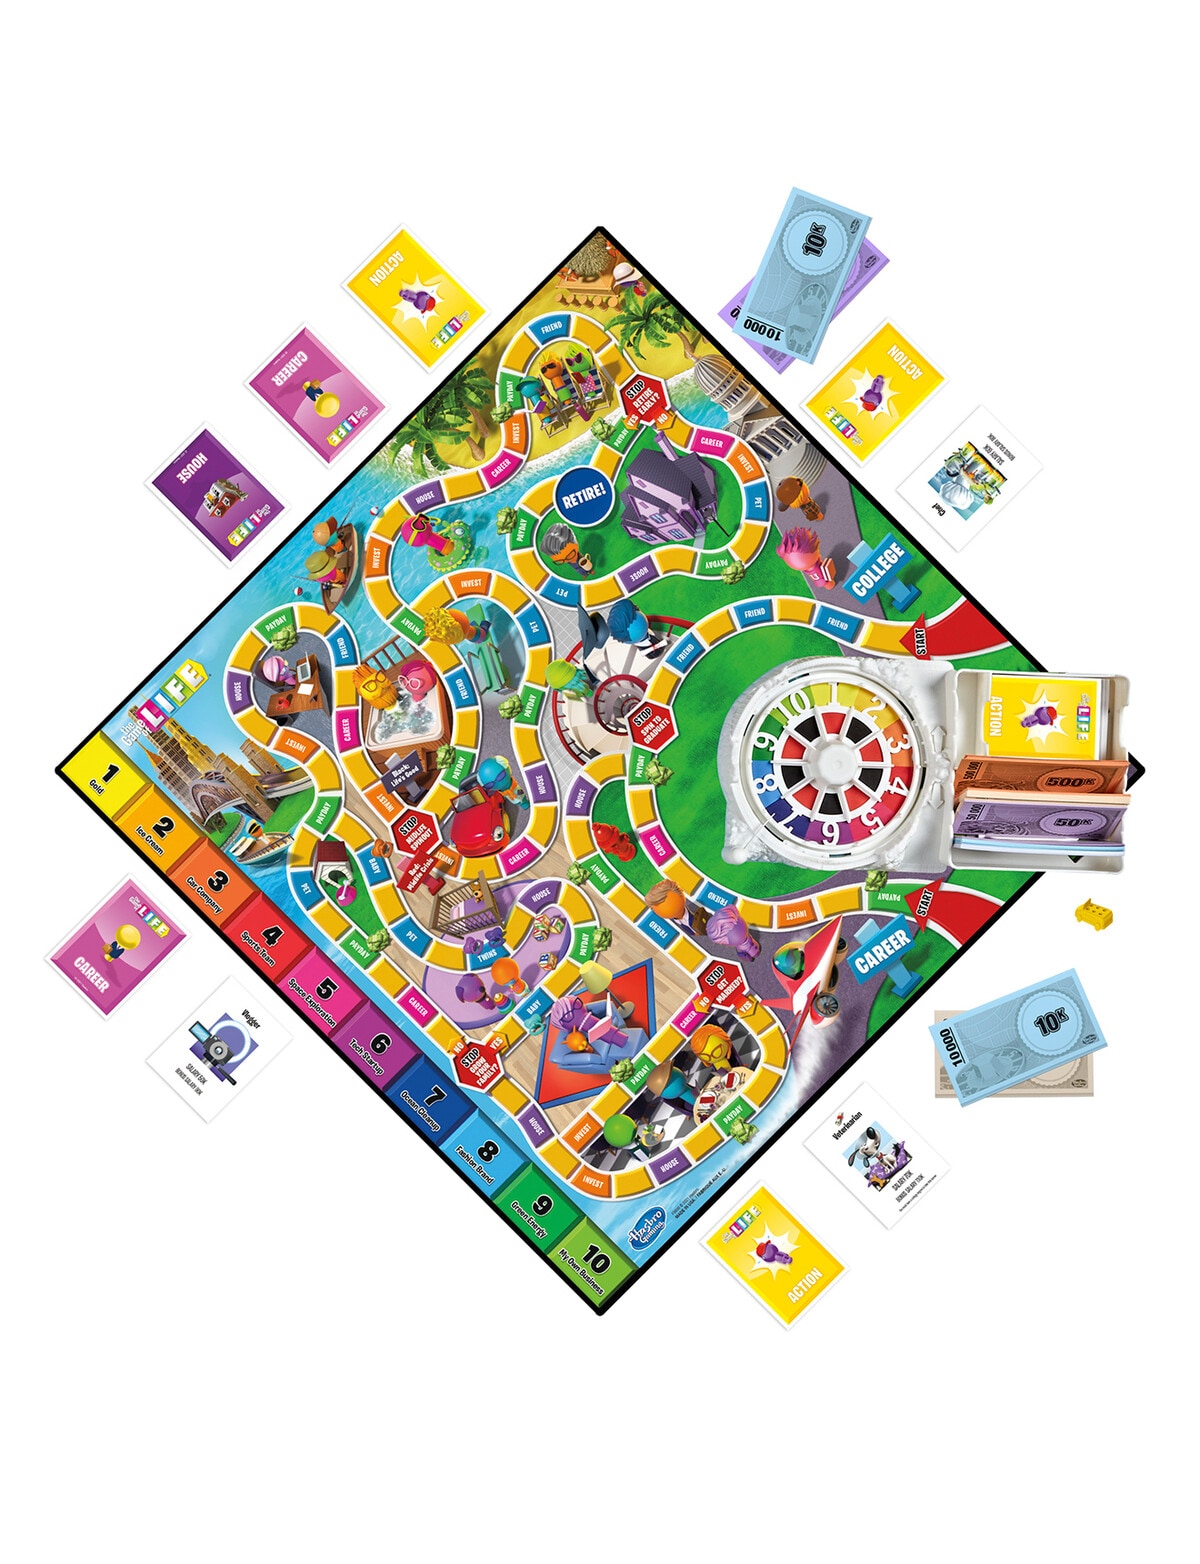  Hasbro Gaming The Game of Life Game, Family Board Game